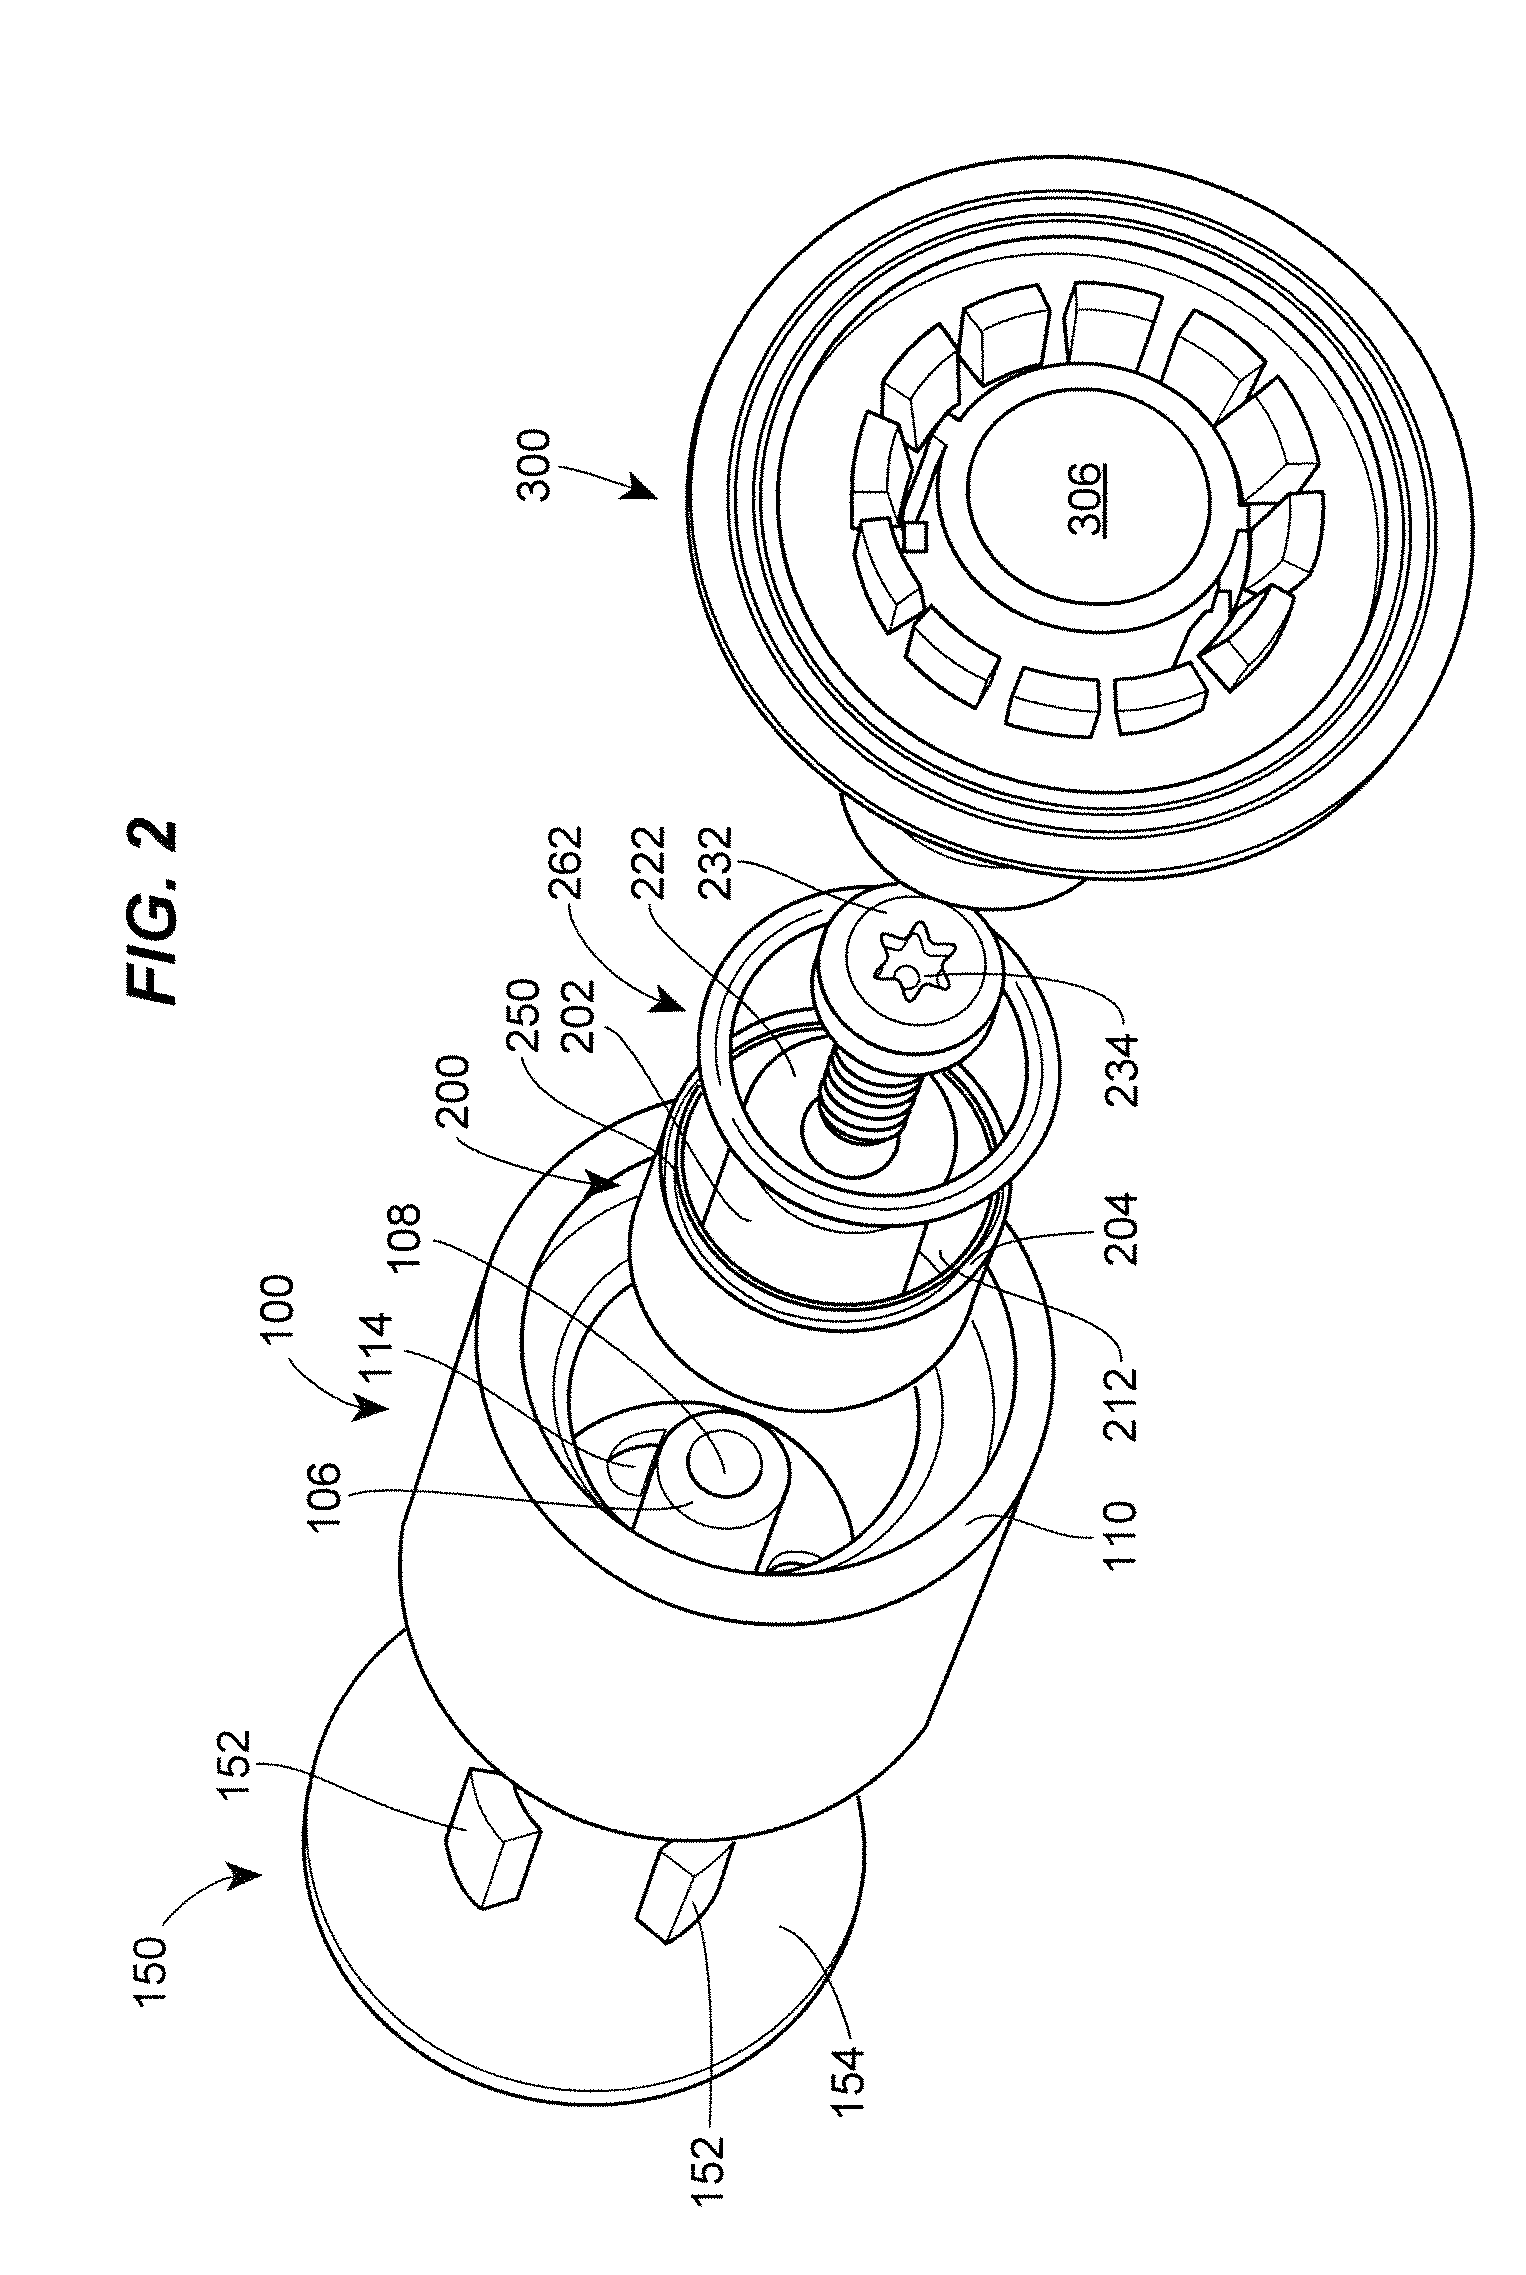 Adapters for use with an anesthetic vaporizer